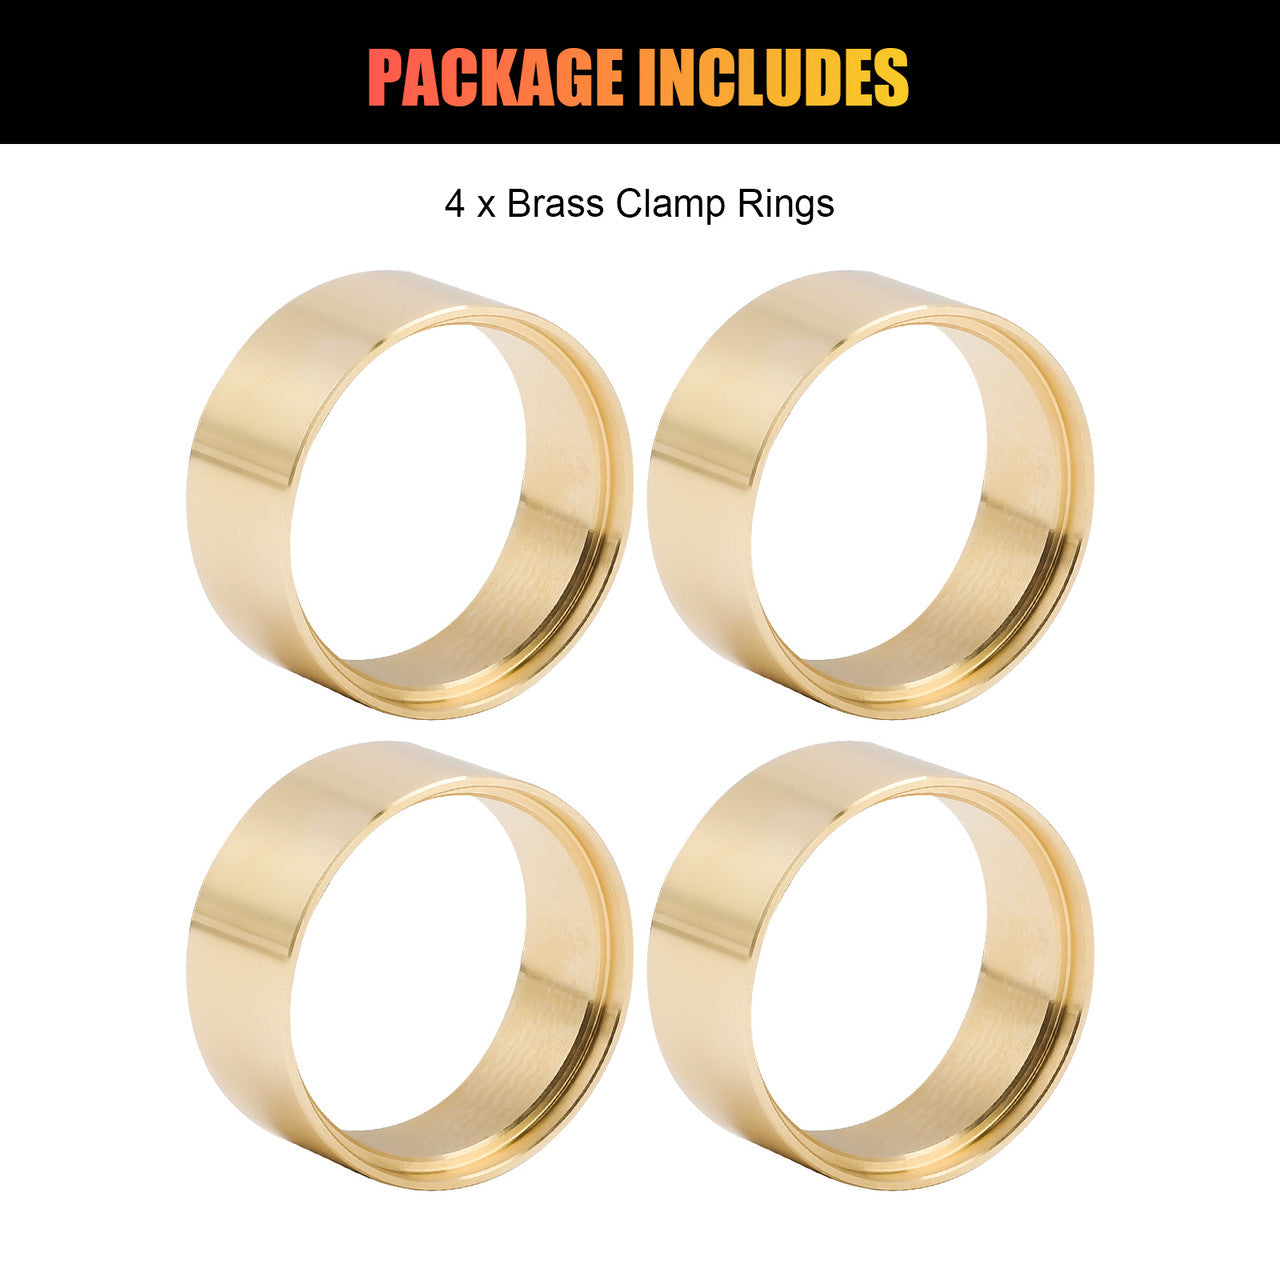 Brass Internal Beadlock Clamp Rings - Perfect upgrade Parts Suit for 1/18 TRX4M 1/24 RC Crawler Axial SCX24 Car (Gold)